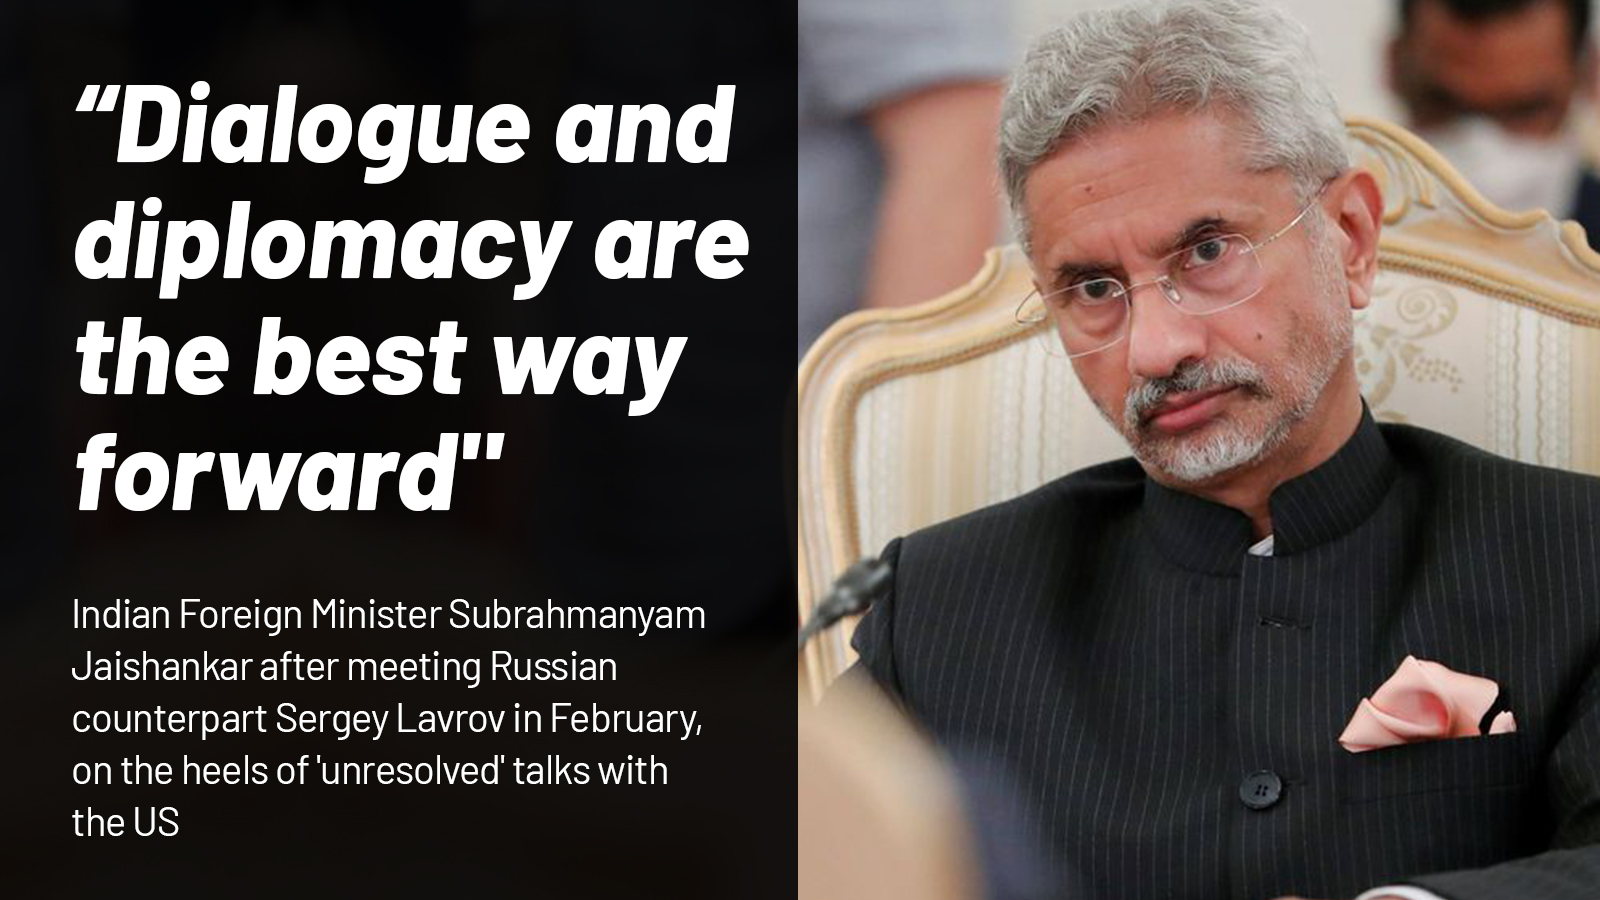 Indian Foreign Minister Subrahmanyam Jaishankar after meeting Russian counterpart Sergey Lavrov in February, on the heels of 'unresolved' talks with the US. India is working to strengthen a rupee-rouble trade agreement to enable it to continue trading with Russia amid Western sanctions.